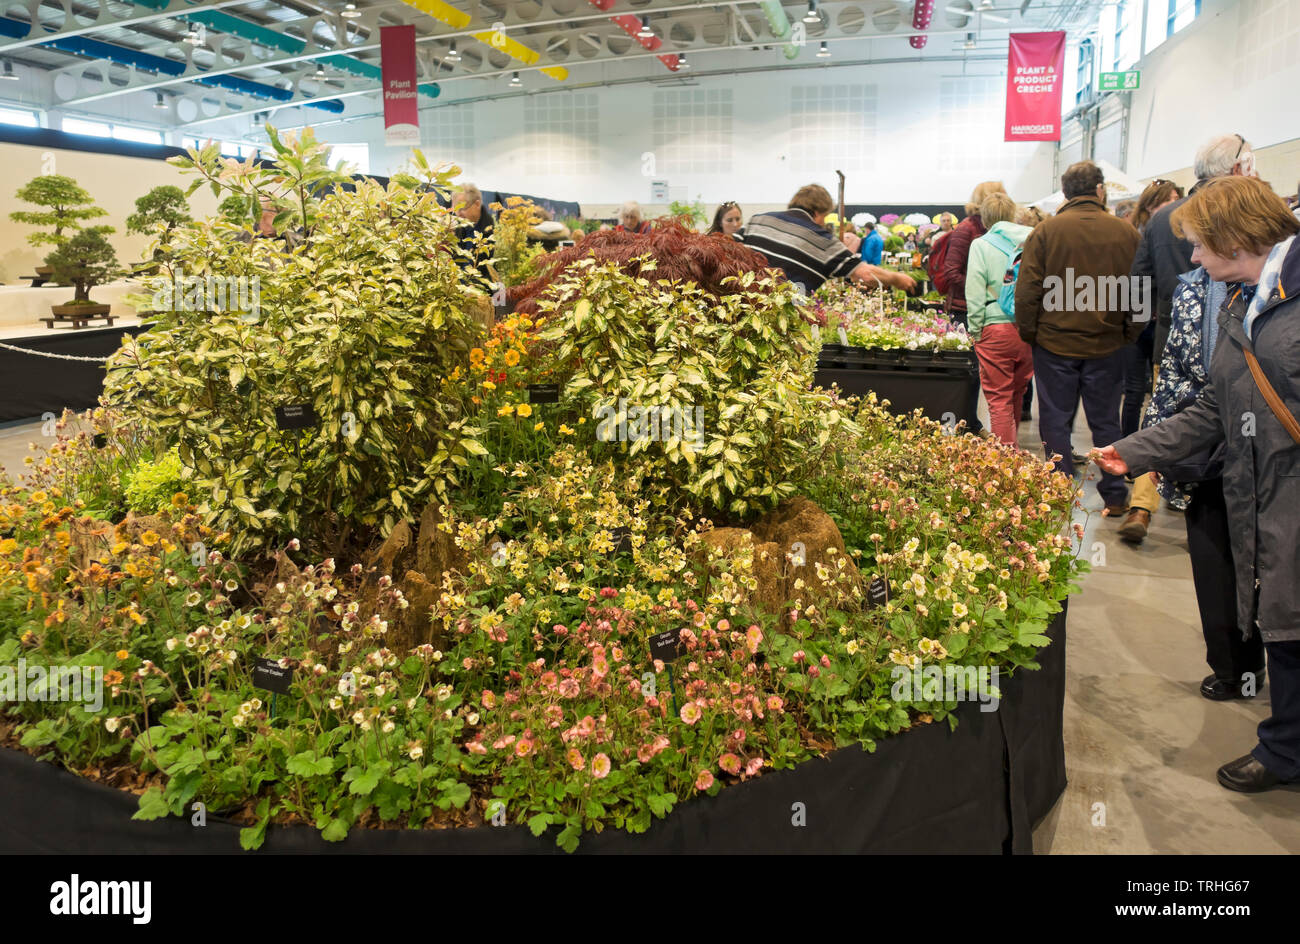 People looking at plant display at the Spring Flower Show Harrogate North Yorkshire England UK United Kingdom GB Great Britain Stock Photo